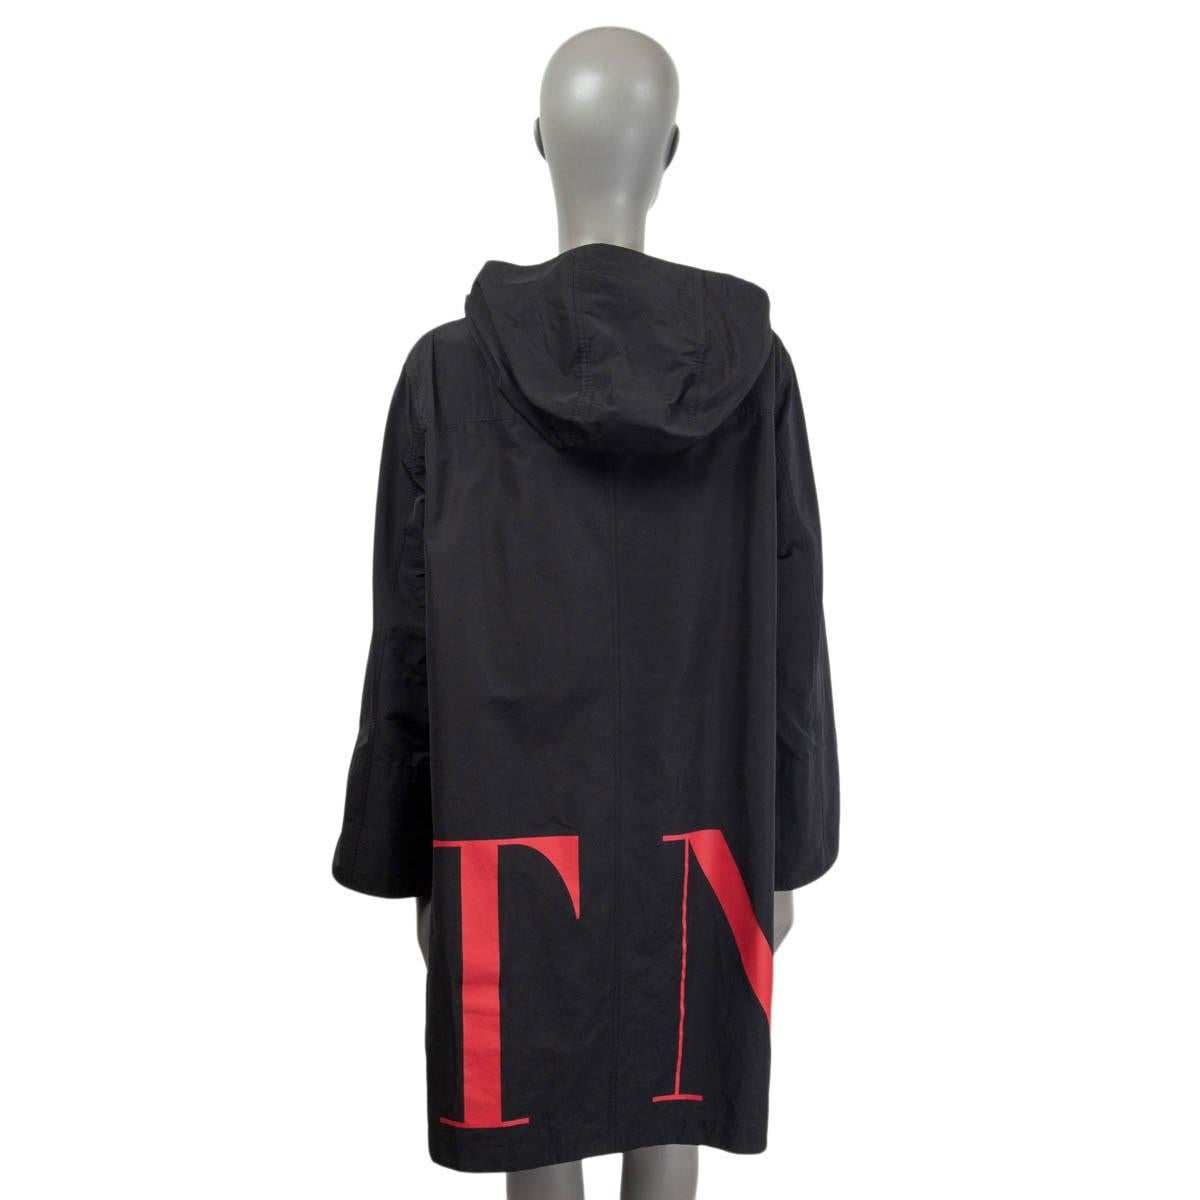 VALENTINO black & red cotton VLTN LOGO HOODED Coat Jacket 40 S In Excellent Condition For Sale In Zürich, CH